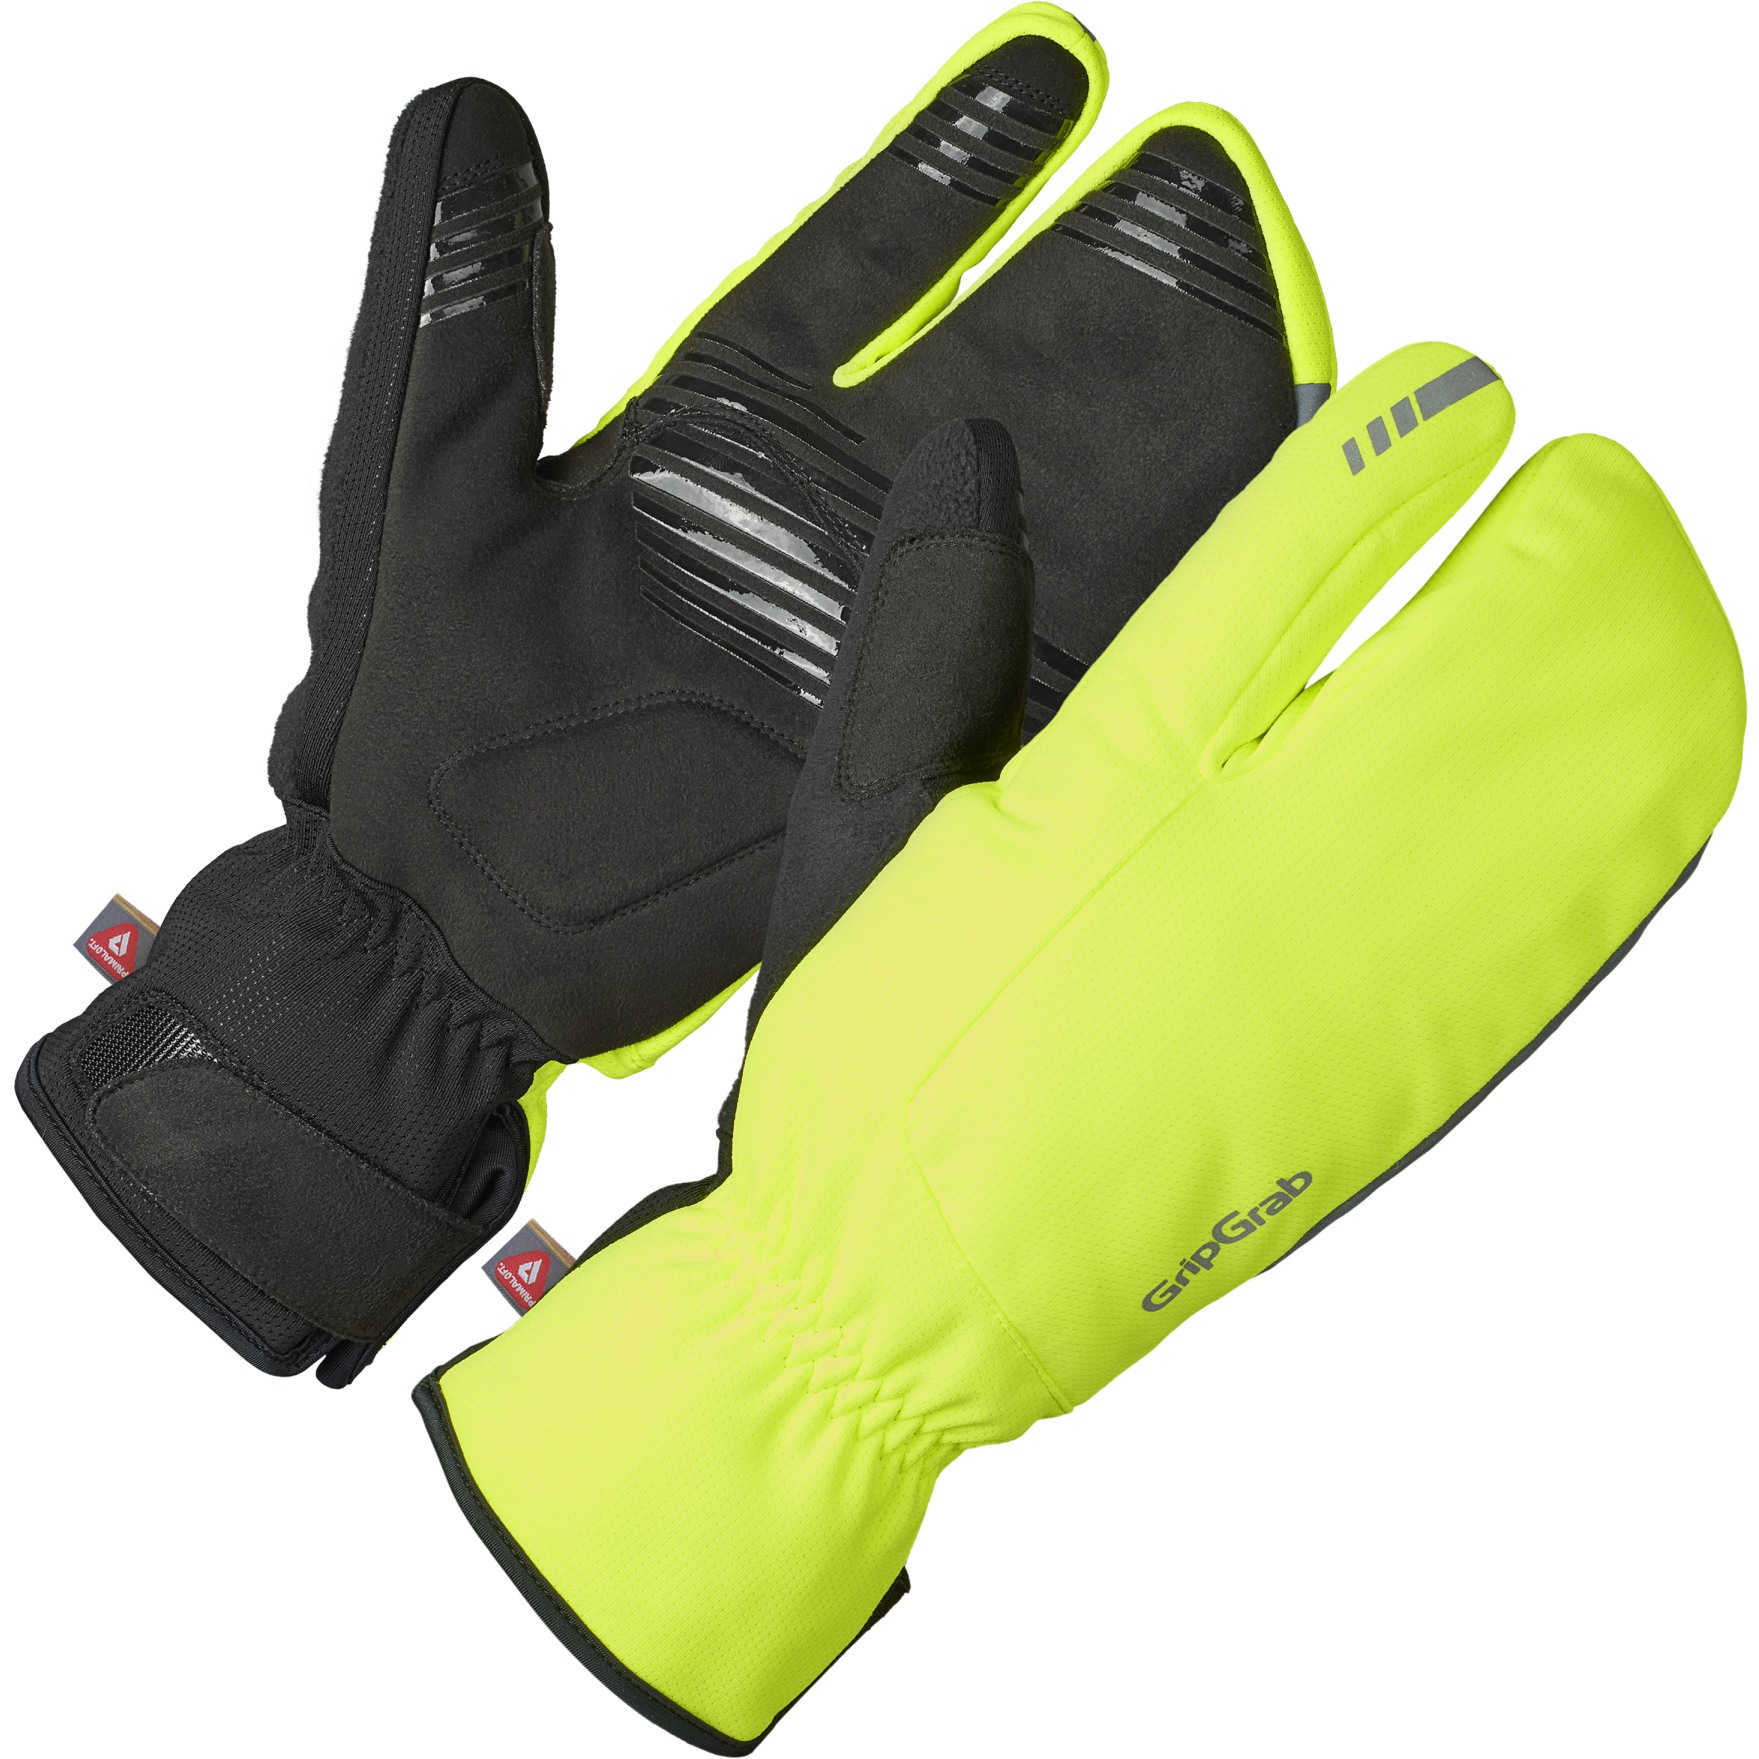 Picture of GripGrab Nordic 2 Windproof Deep Winter Lobster Gloves - yellow hi-vis